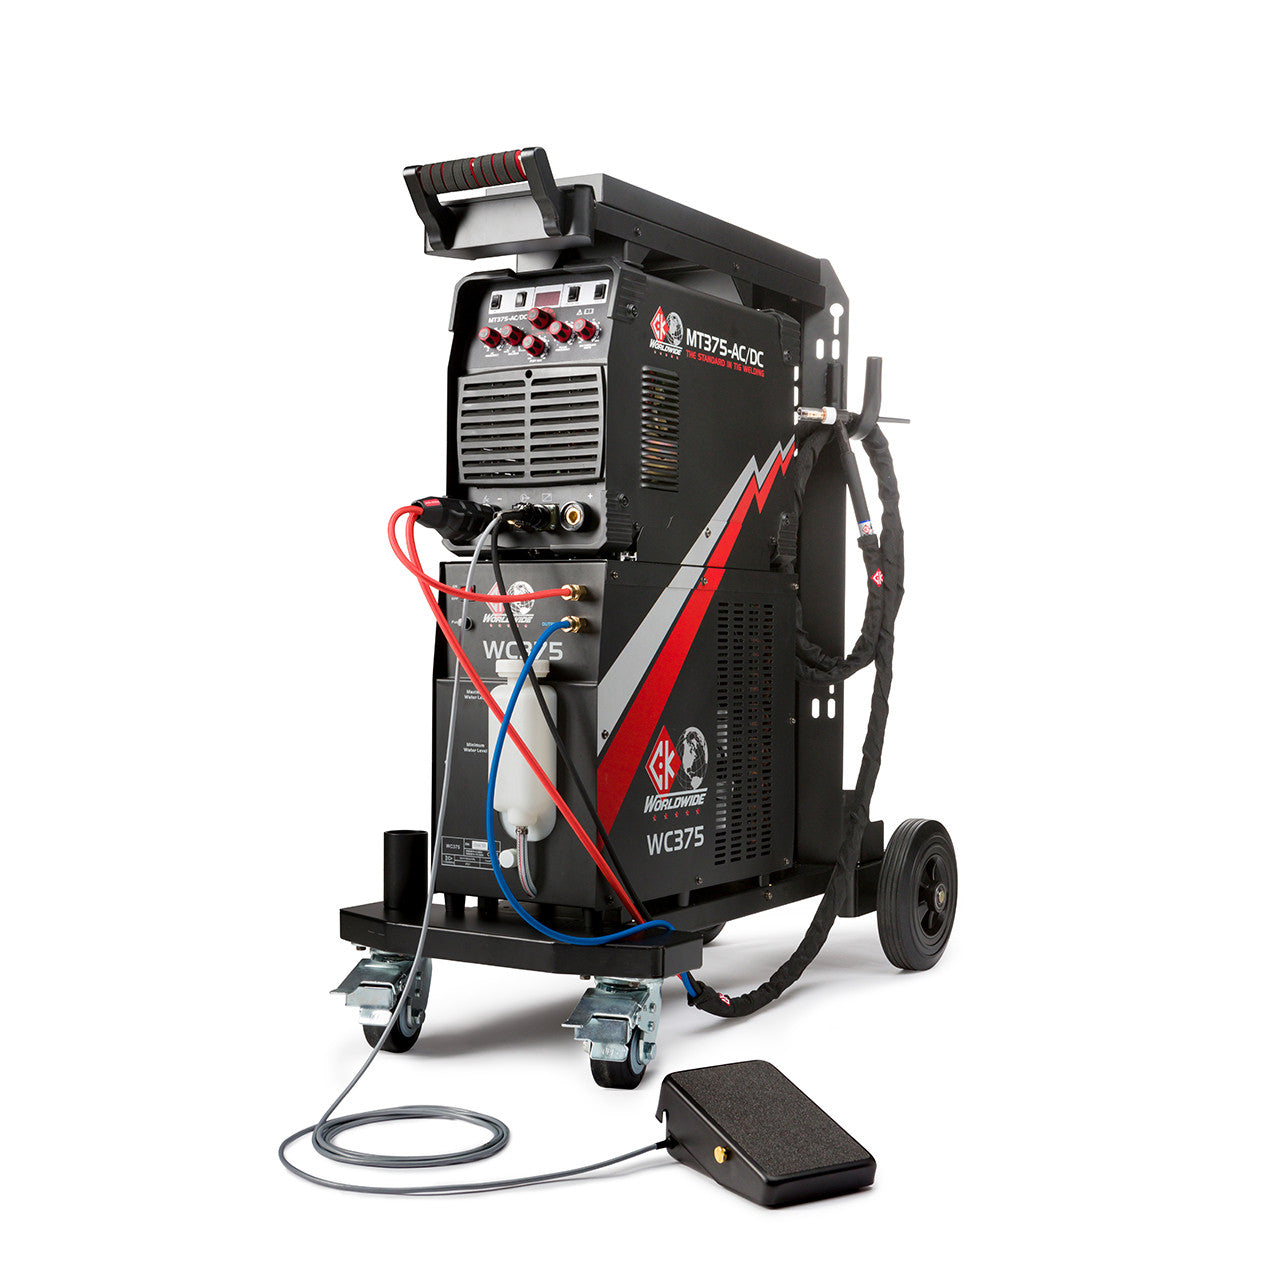 CK Worldwide Water-Cooled TIG Welding System (MT375-AC/DC)